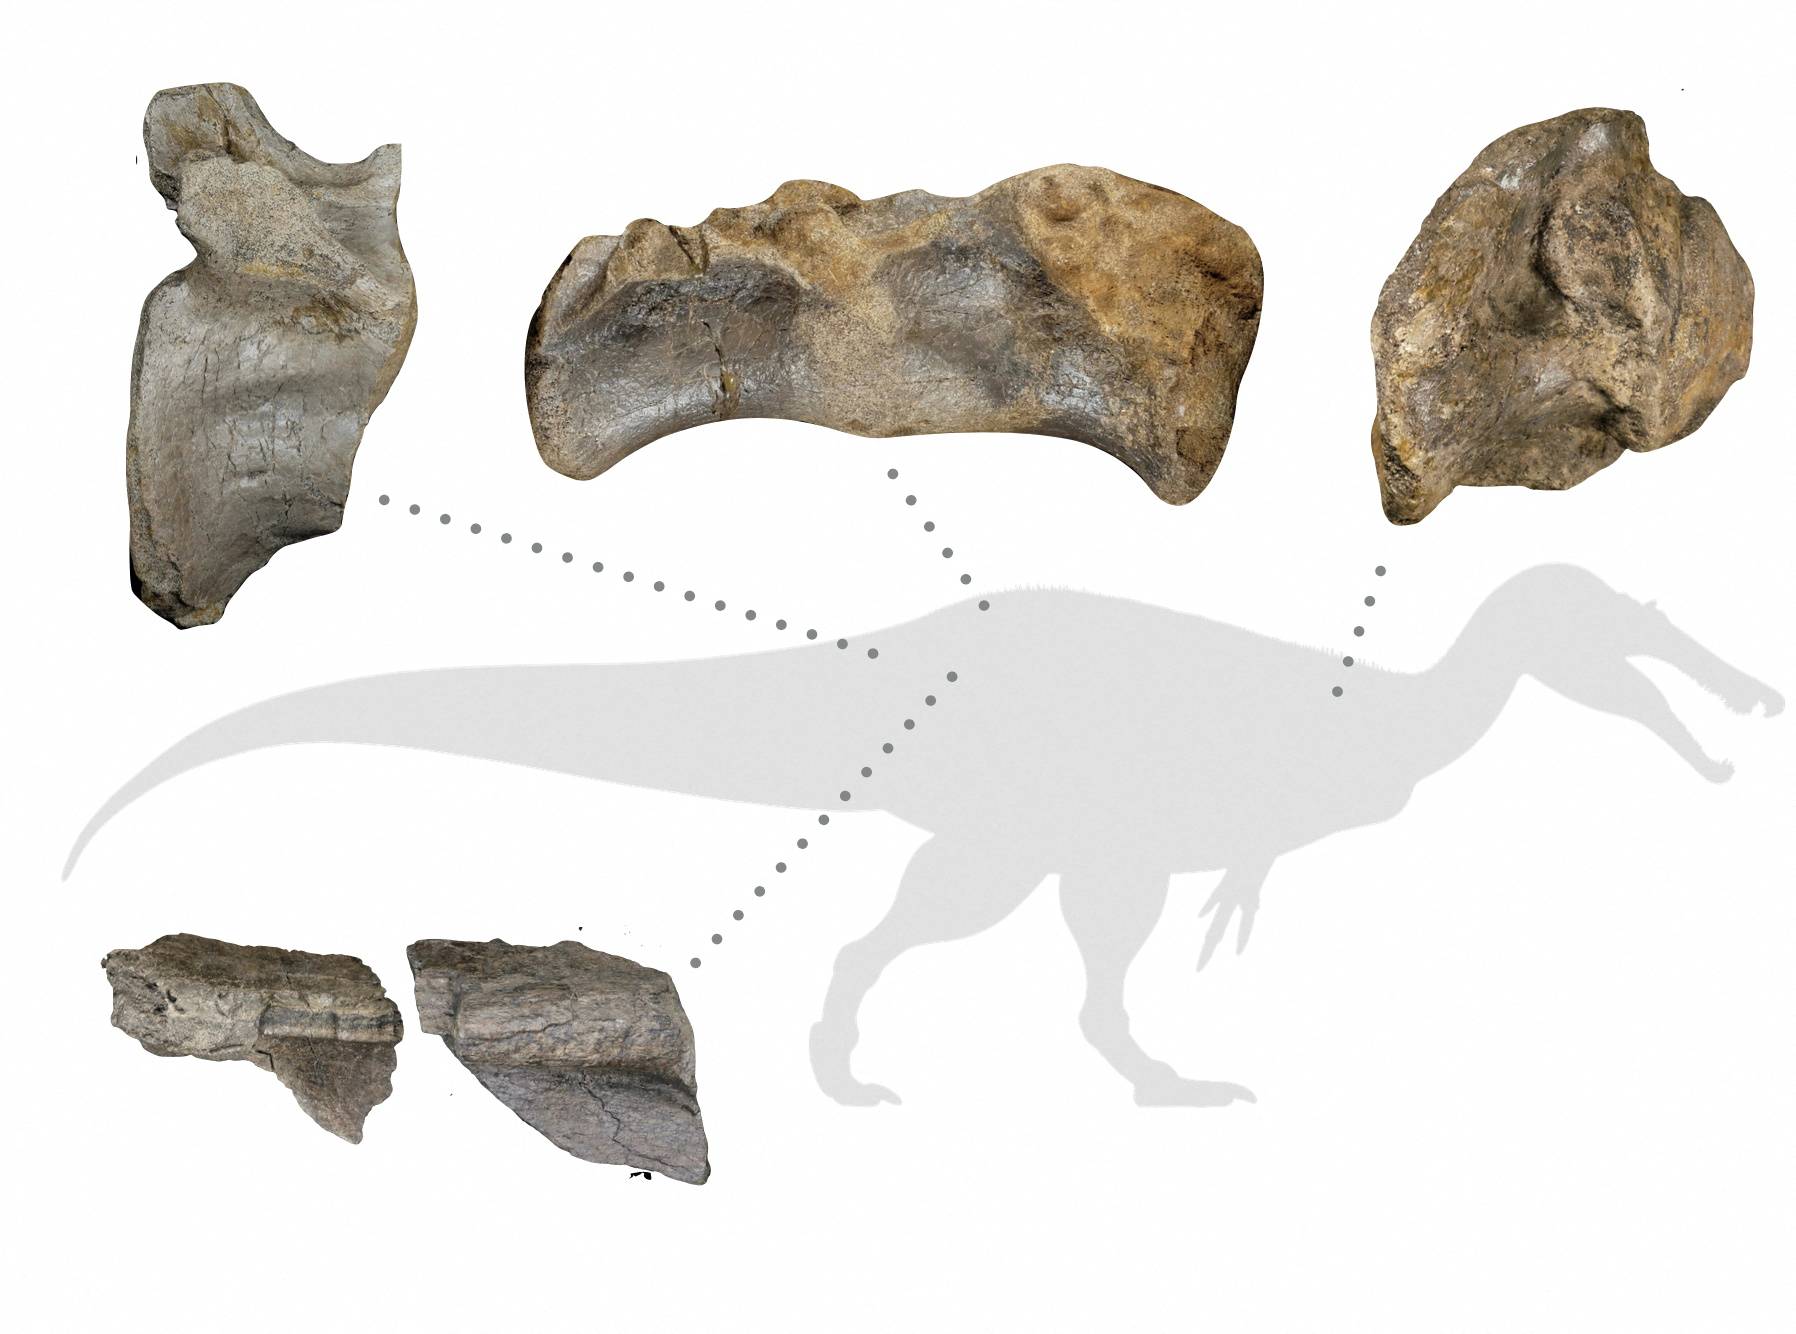 Diagram shows fossil remains of a large meat-eating dinosaur dubbed the "White Rock spinosaurid,\